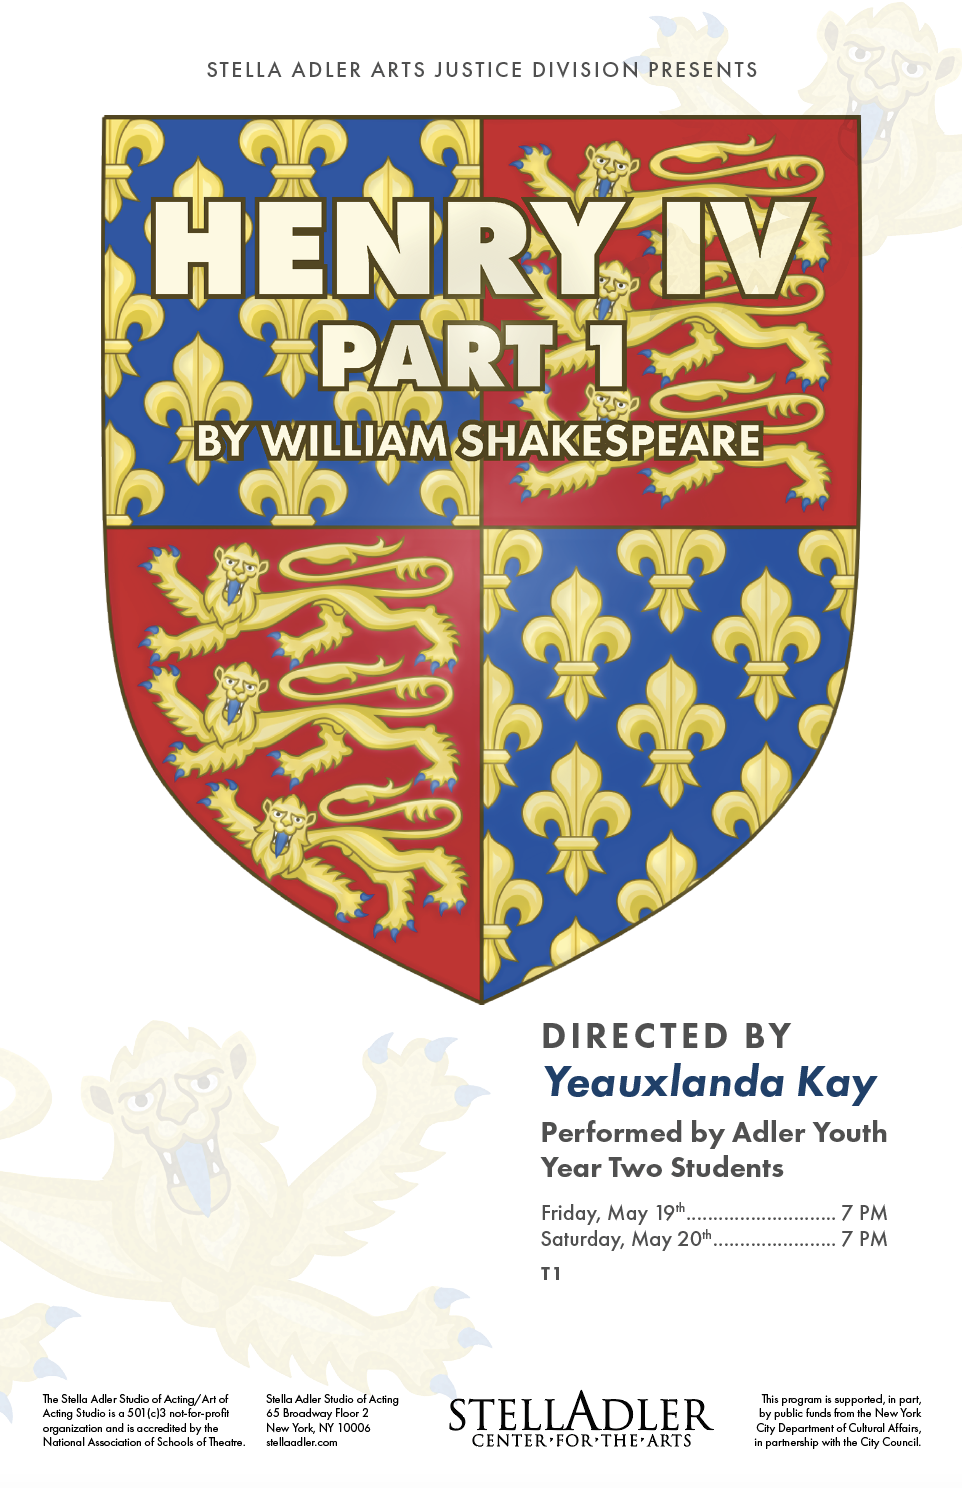 Adler Youth Year 2 Presents Henry IV pt 1 by William Shakespeare